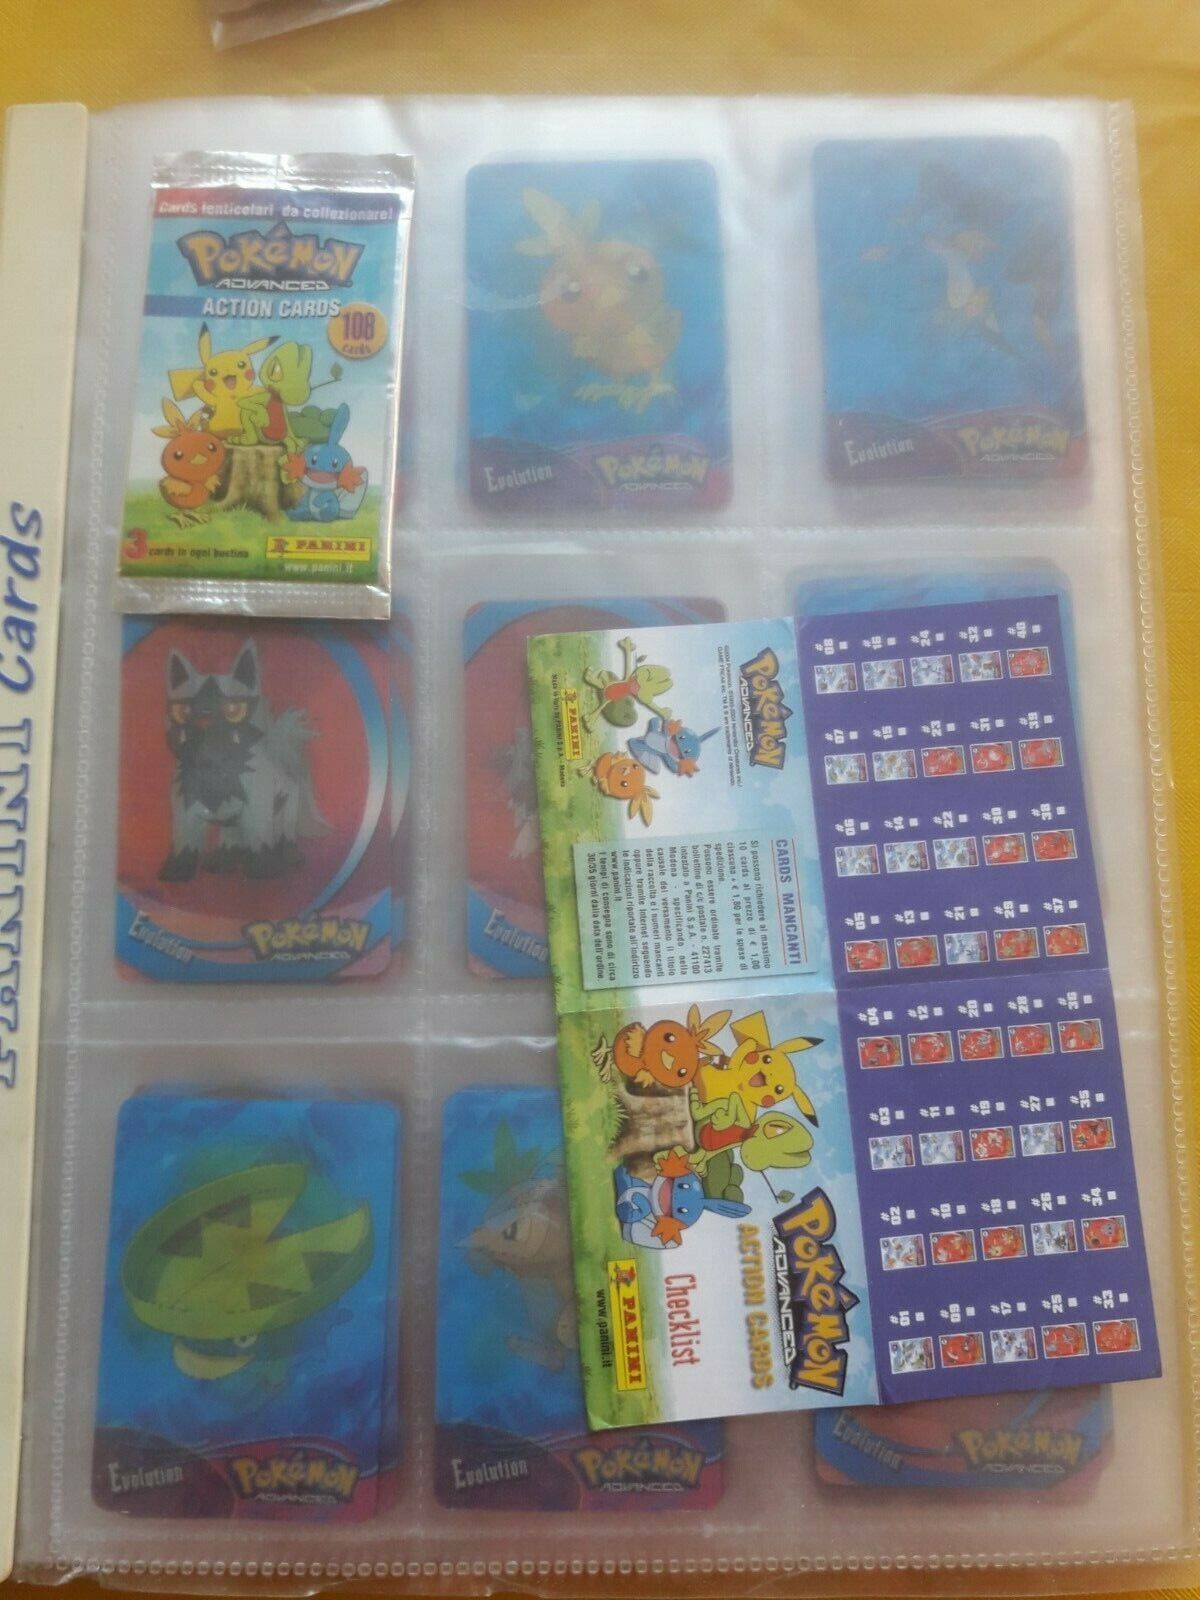  Pokemon Advanced Action Cards 1/108 Panini Complete Mint Condition Complete Set